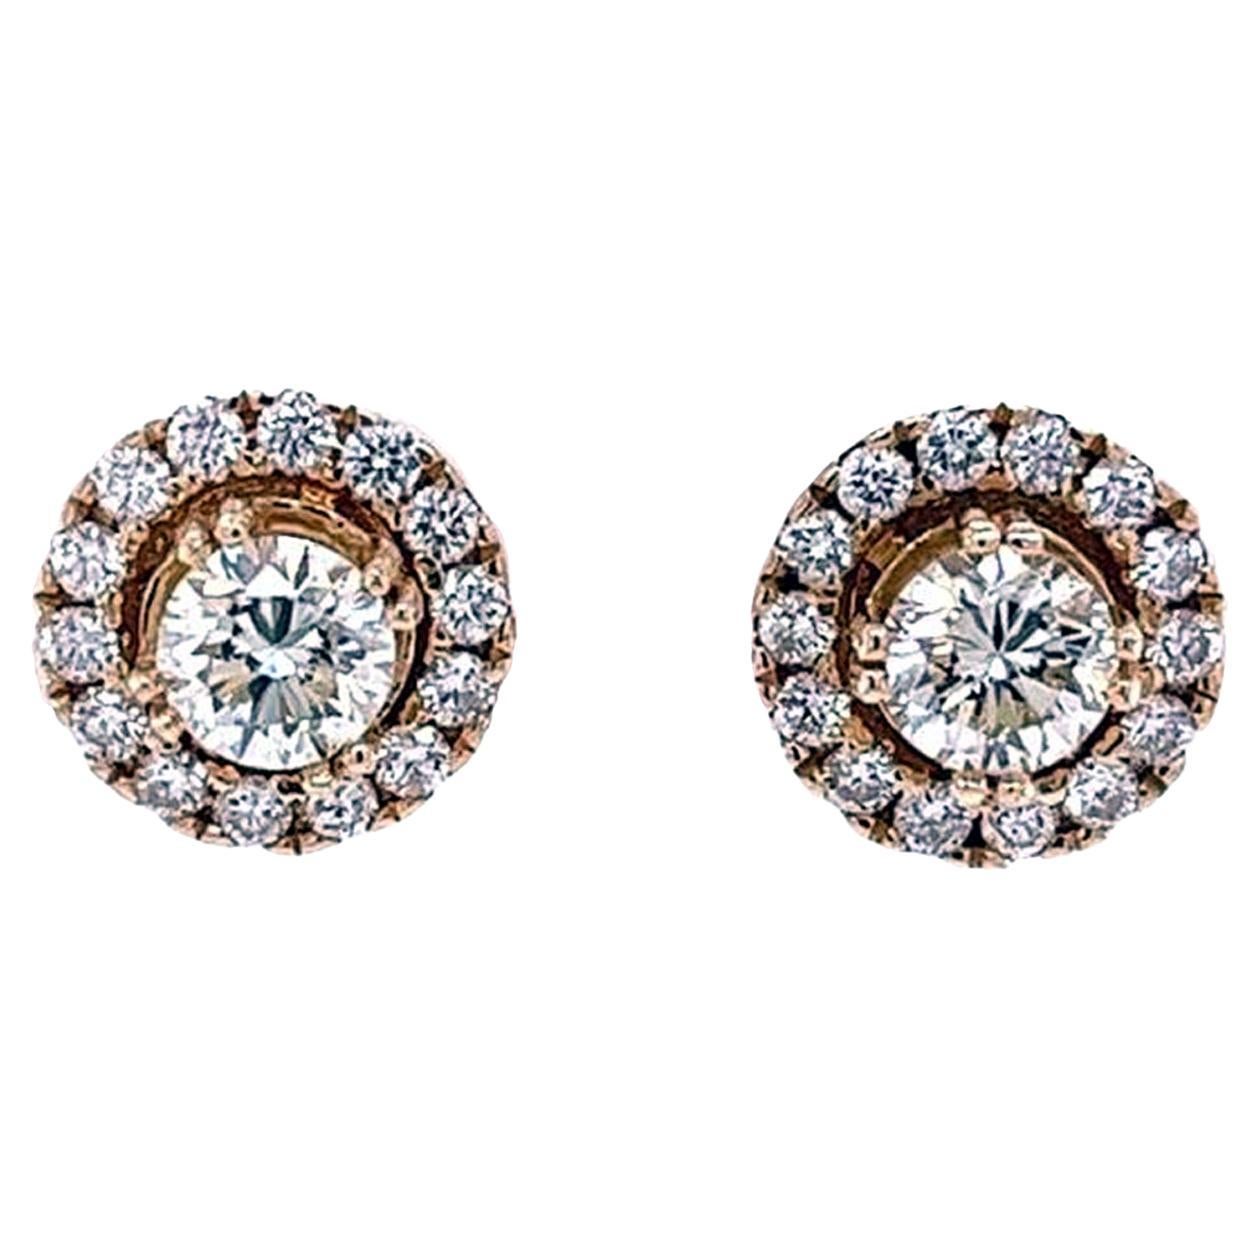 1.40ct Pave Natural Round Diamond Earrings 14K Yellow Gold Pair Si1/VS2 Clarity For Sale